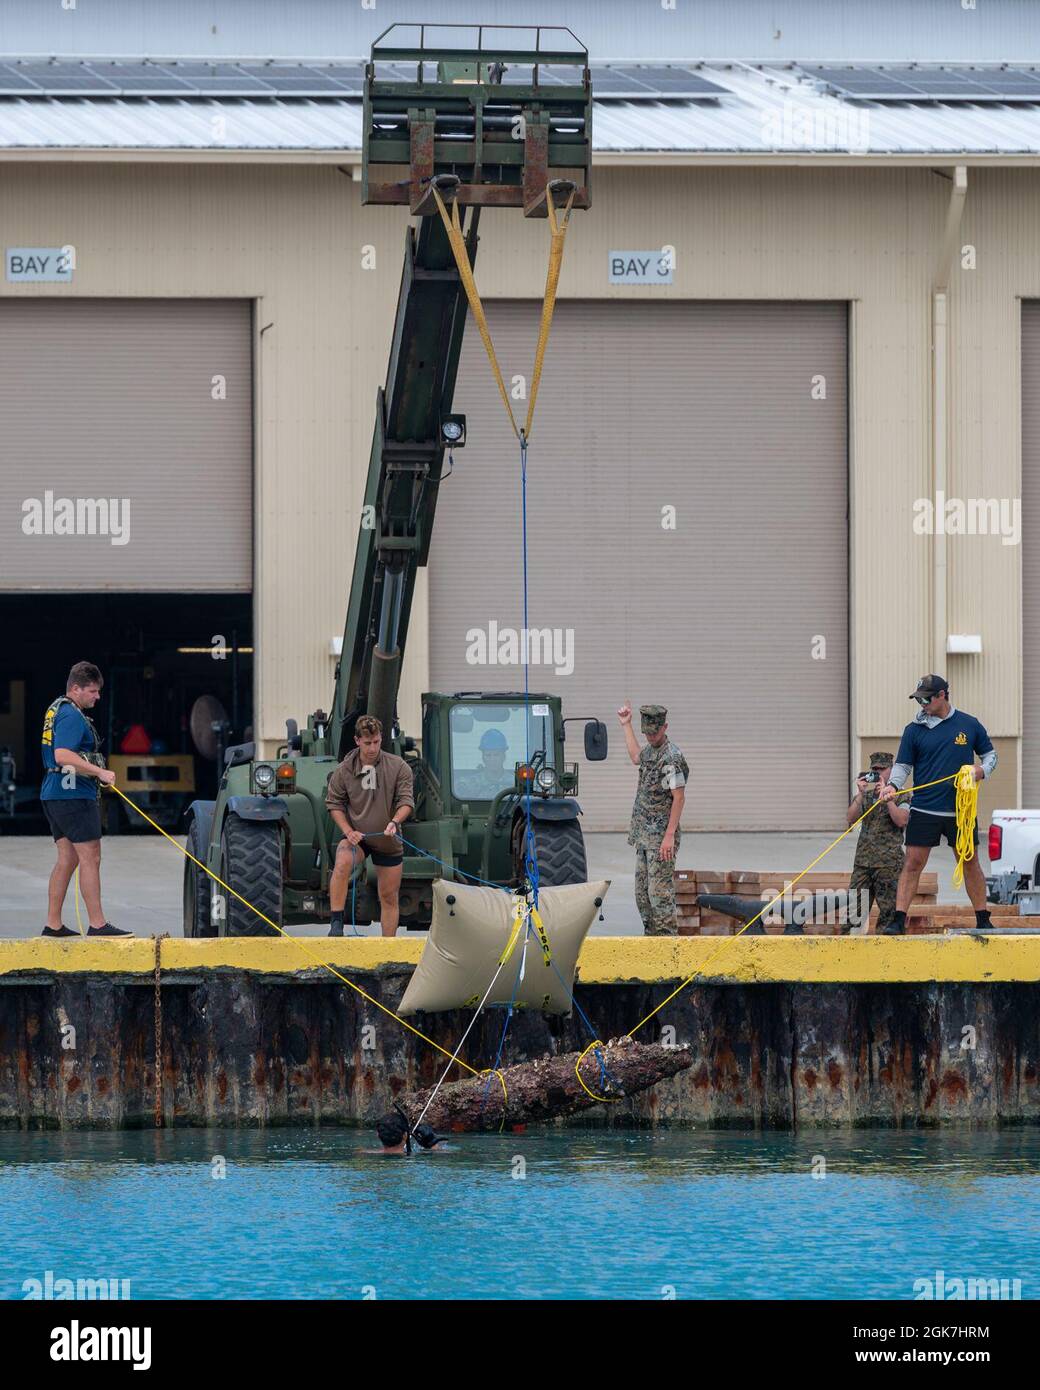 210826-N-OT701-1278 KANEOHE BAY, Hawaii Aug. 26, 2021 -- Sailors assigned to Mobile Diving and Salvage Unit ONE Detachment Explosive Ordnance Disposal Group (MDSU ONE DET EOD) lift an unexploded ordnance Stock Photo